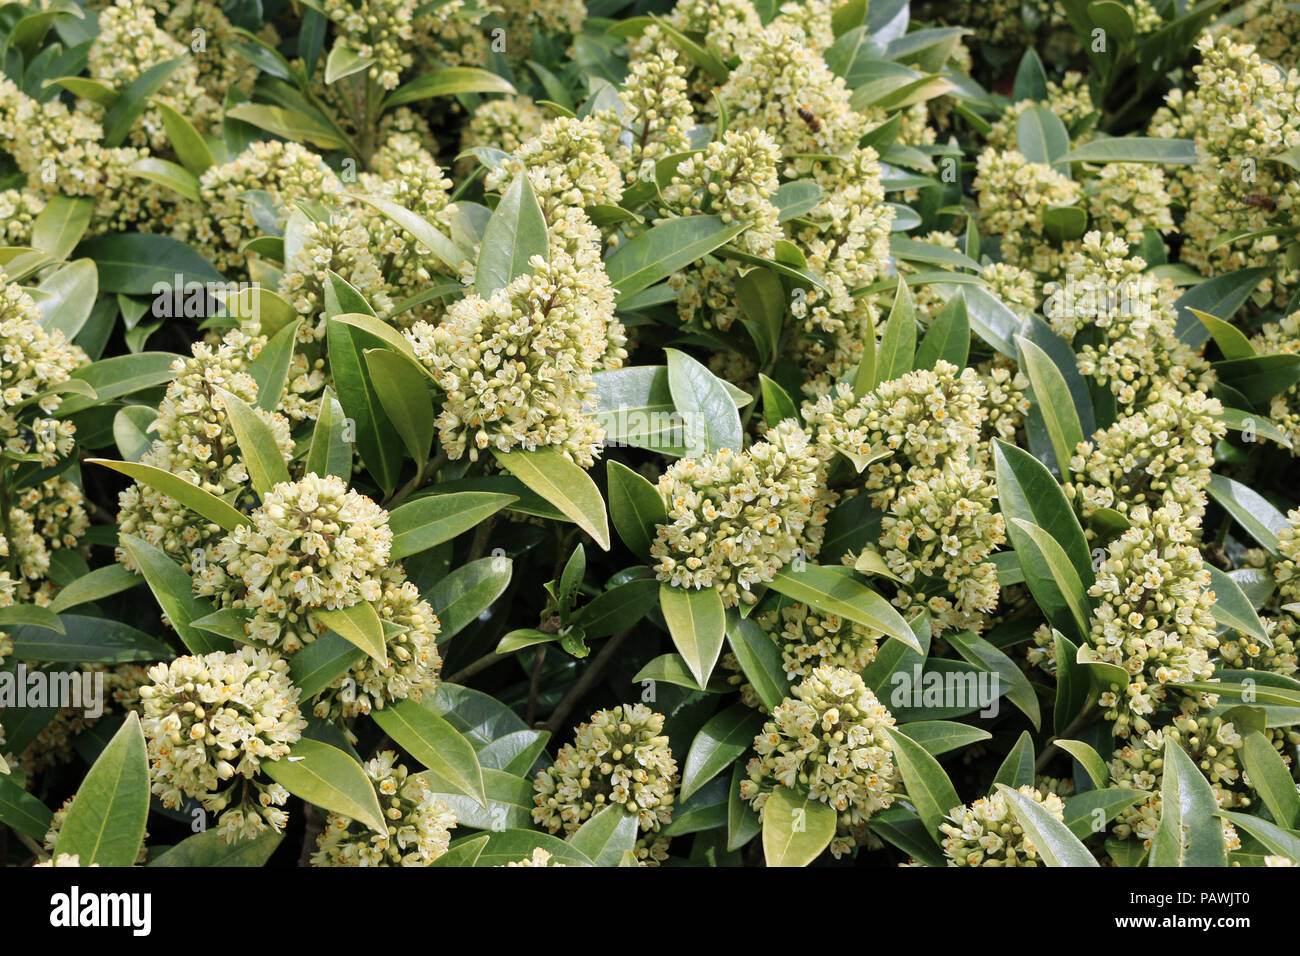 Flowering spikes of the Skimmia x confusa Kew Green evergreen plant in full flower with leaves and flowers of the same plant in the background. Stock Photo